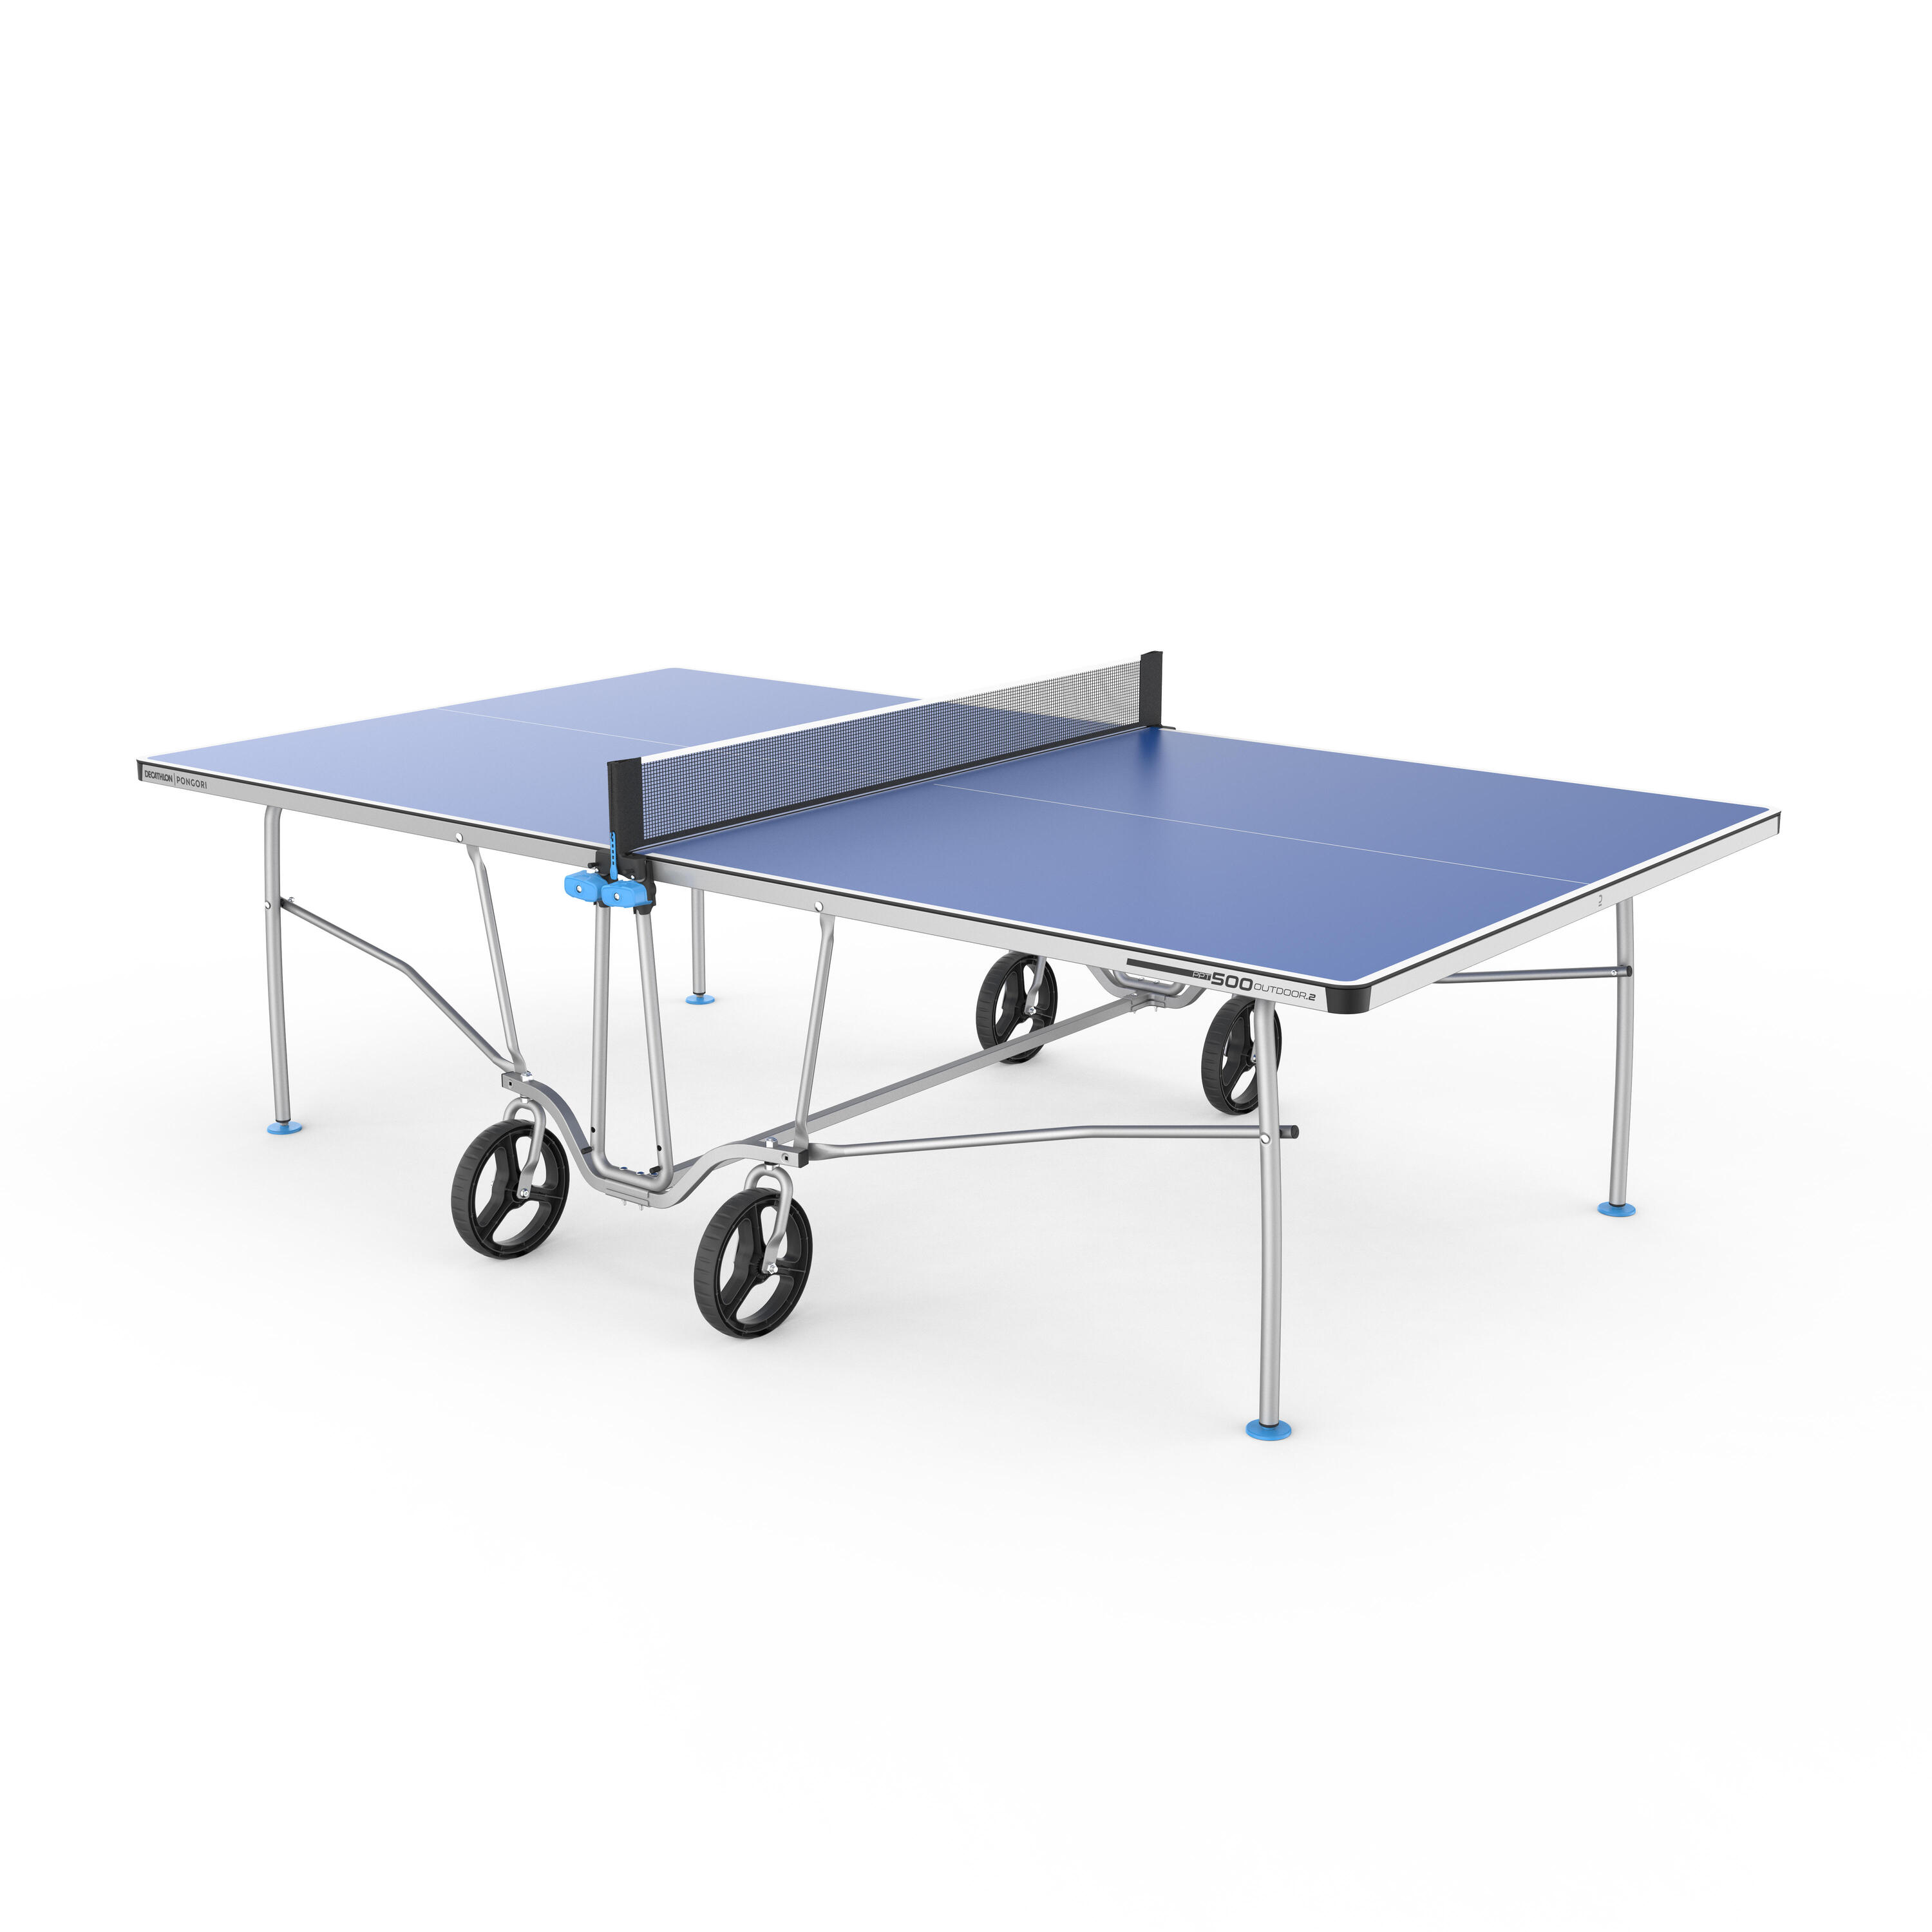 Outdoor Table Tennis Table PPT 500.2 - Blue 14/14